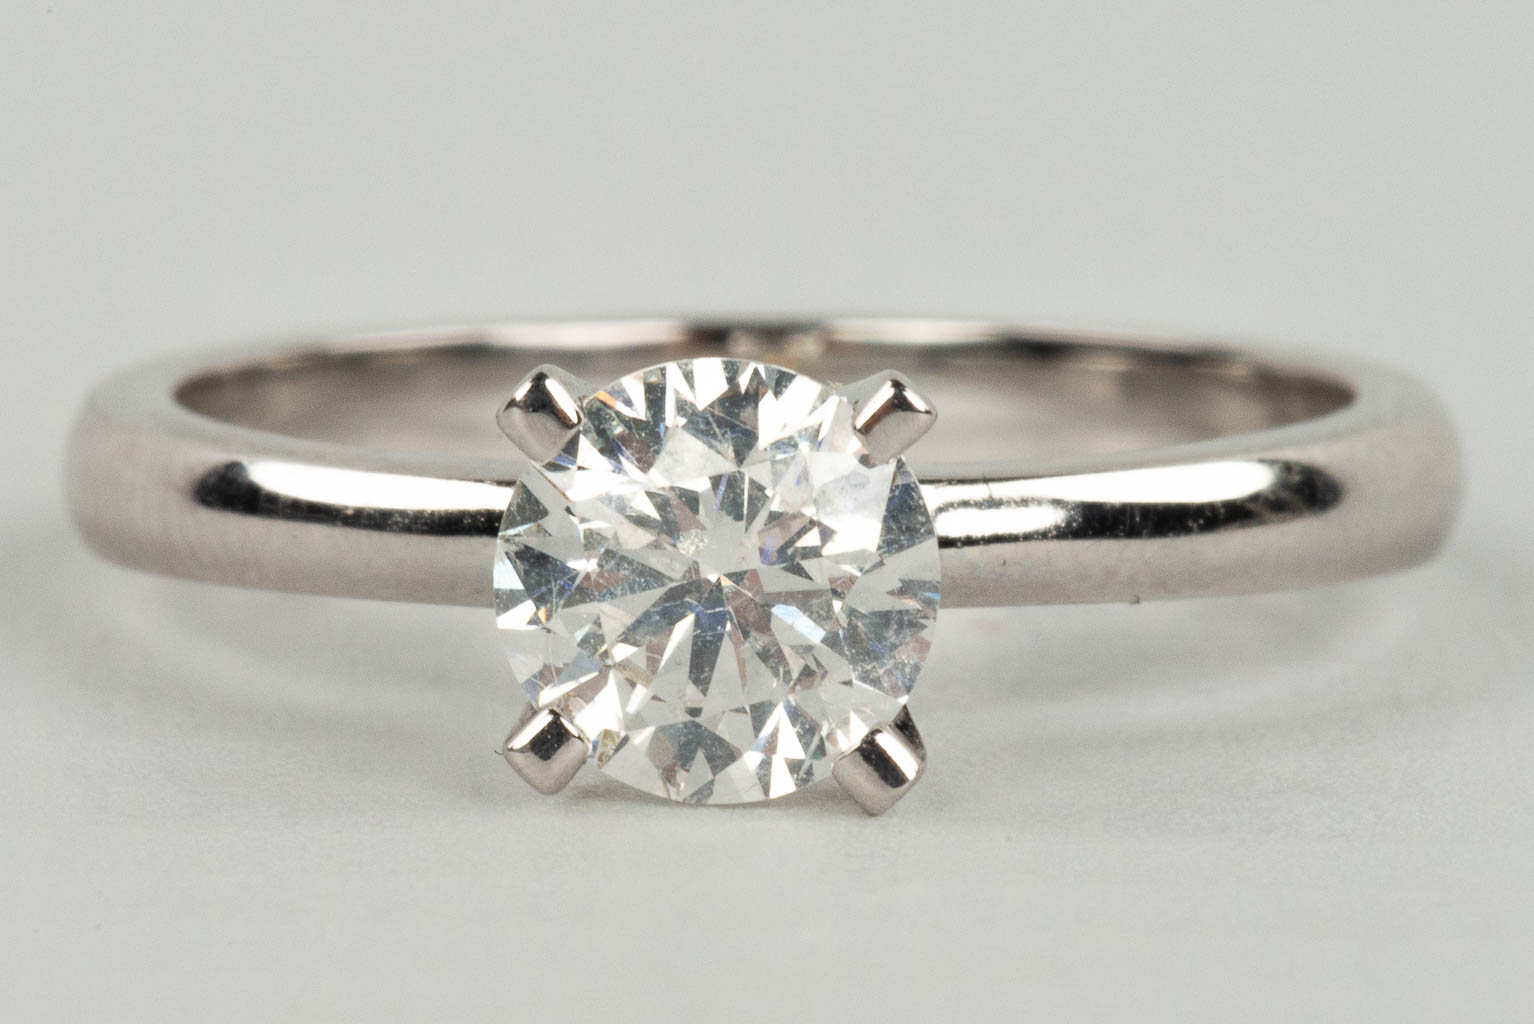 An engagement ring with a solitaire stone in a white gold ring. 1.01 carats. 